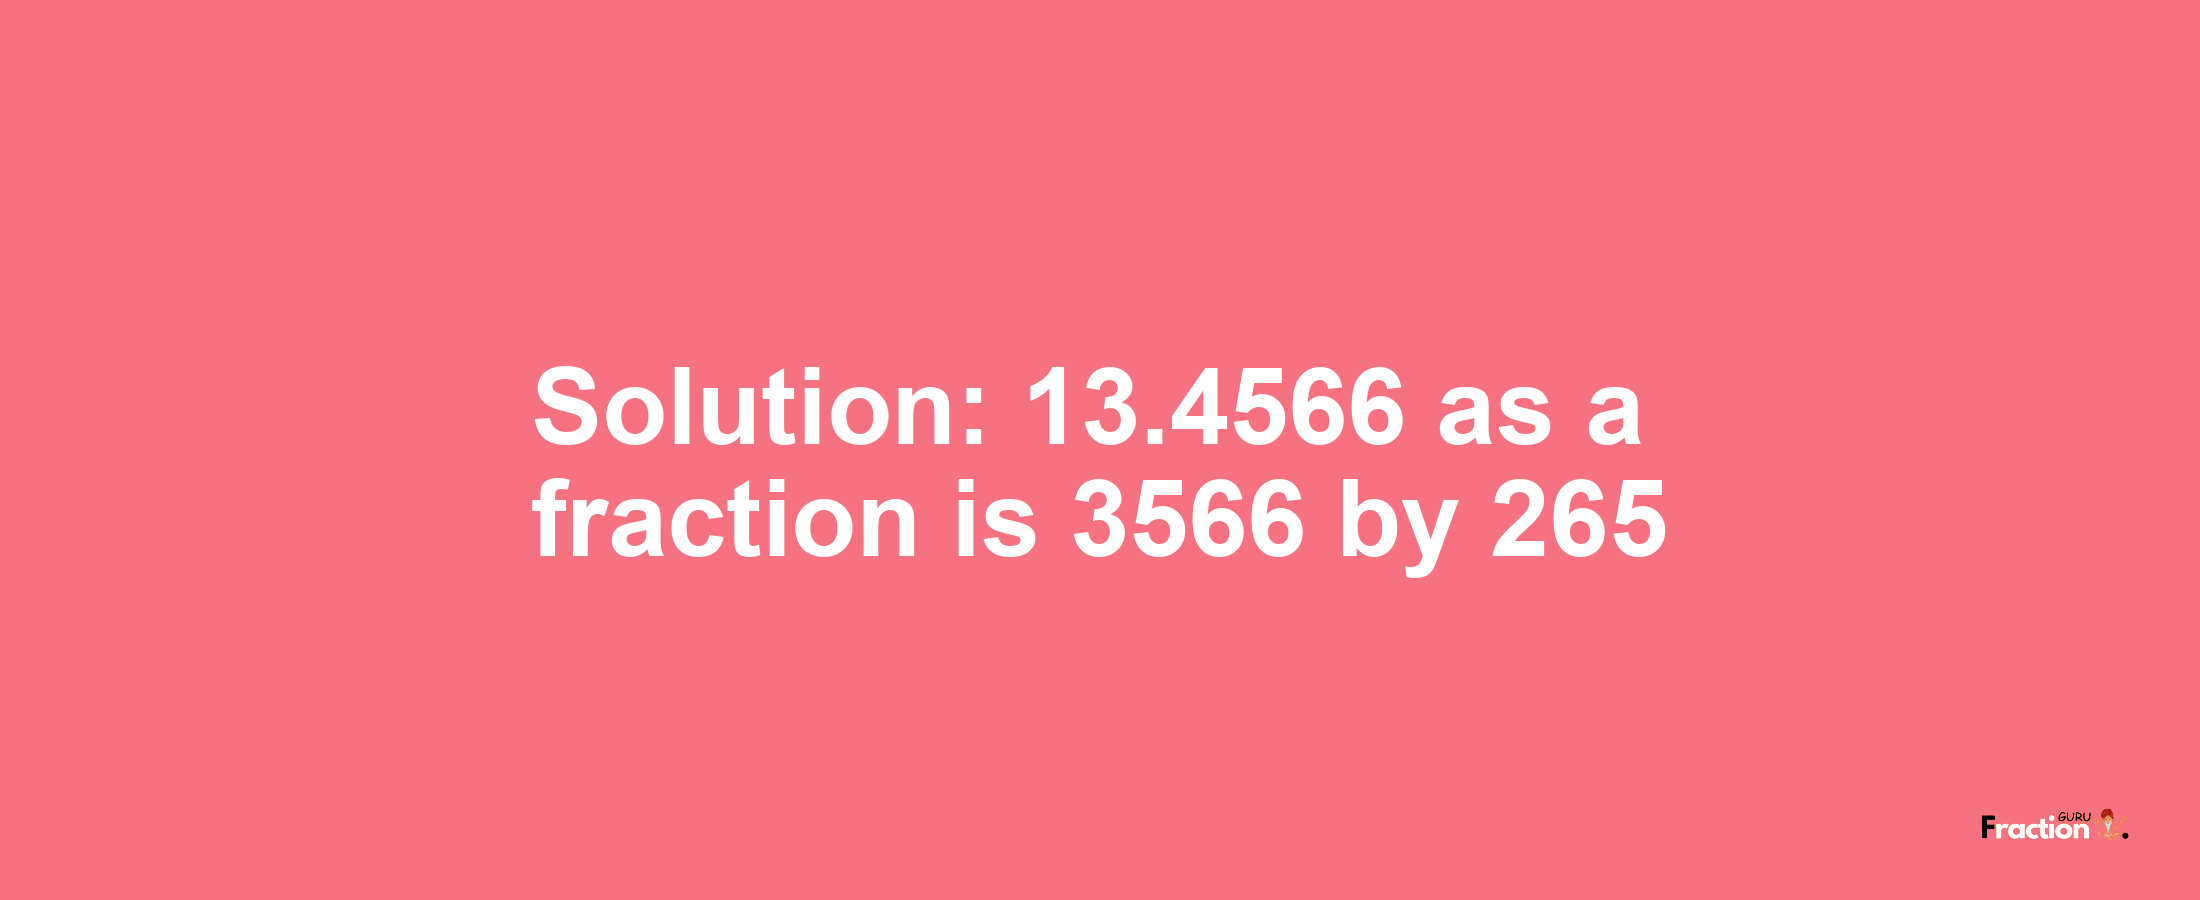 Solution:13.4566 as a fraction is 3566/265